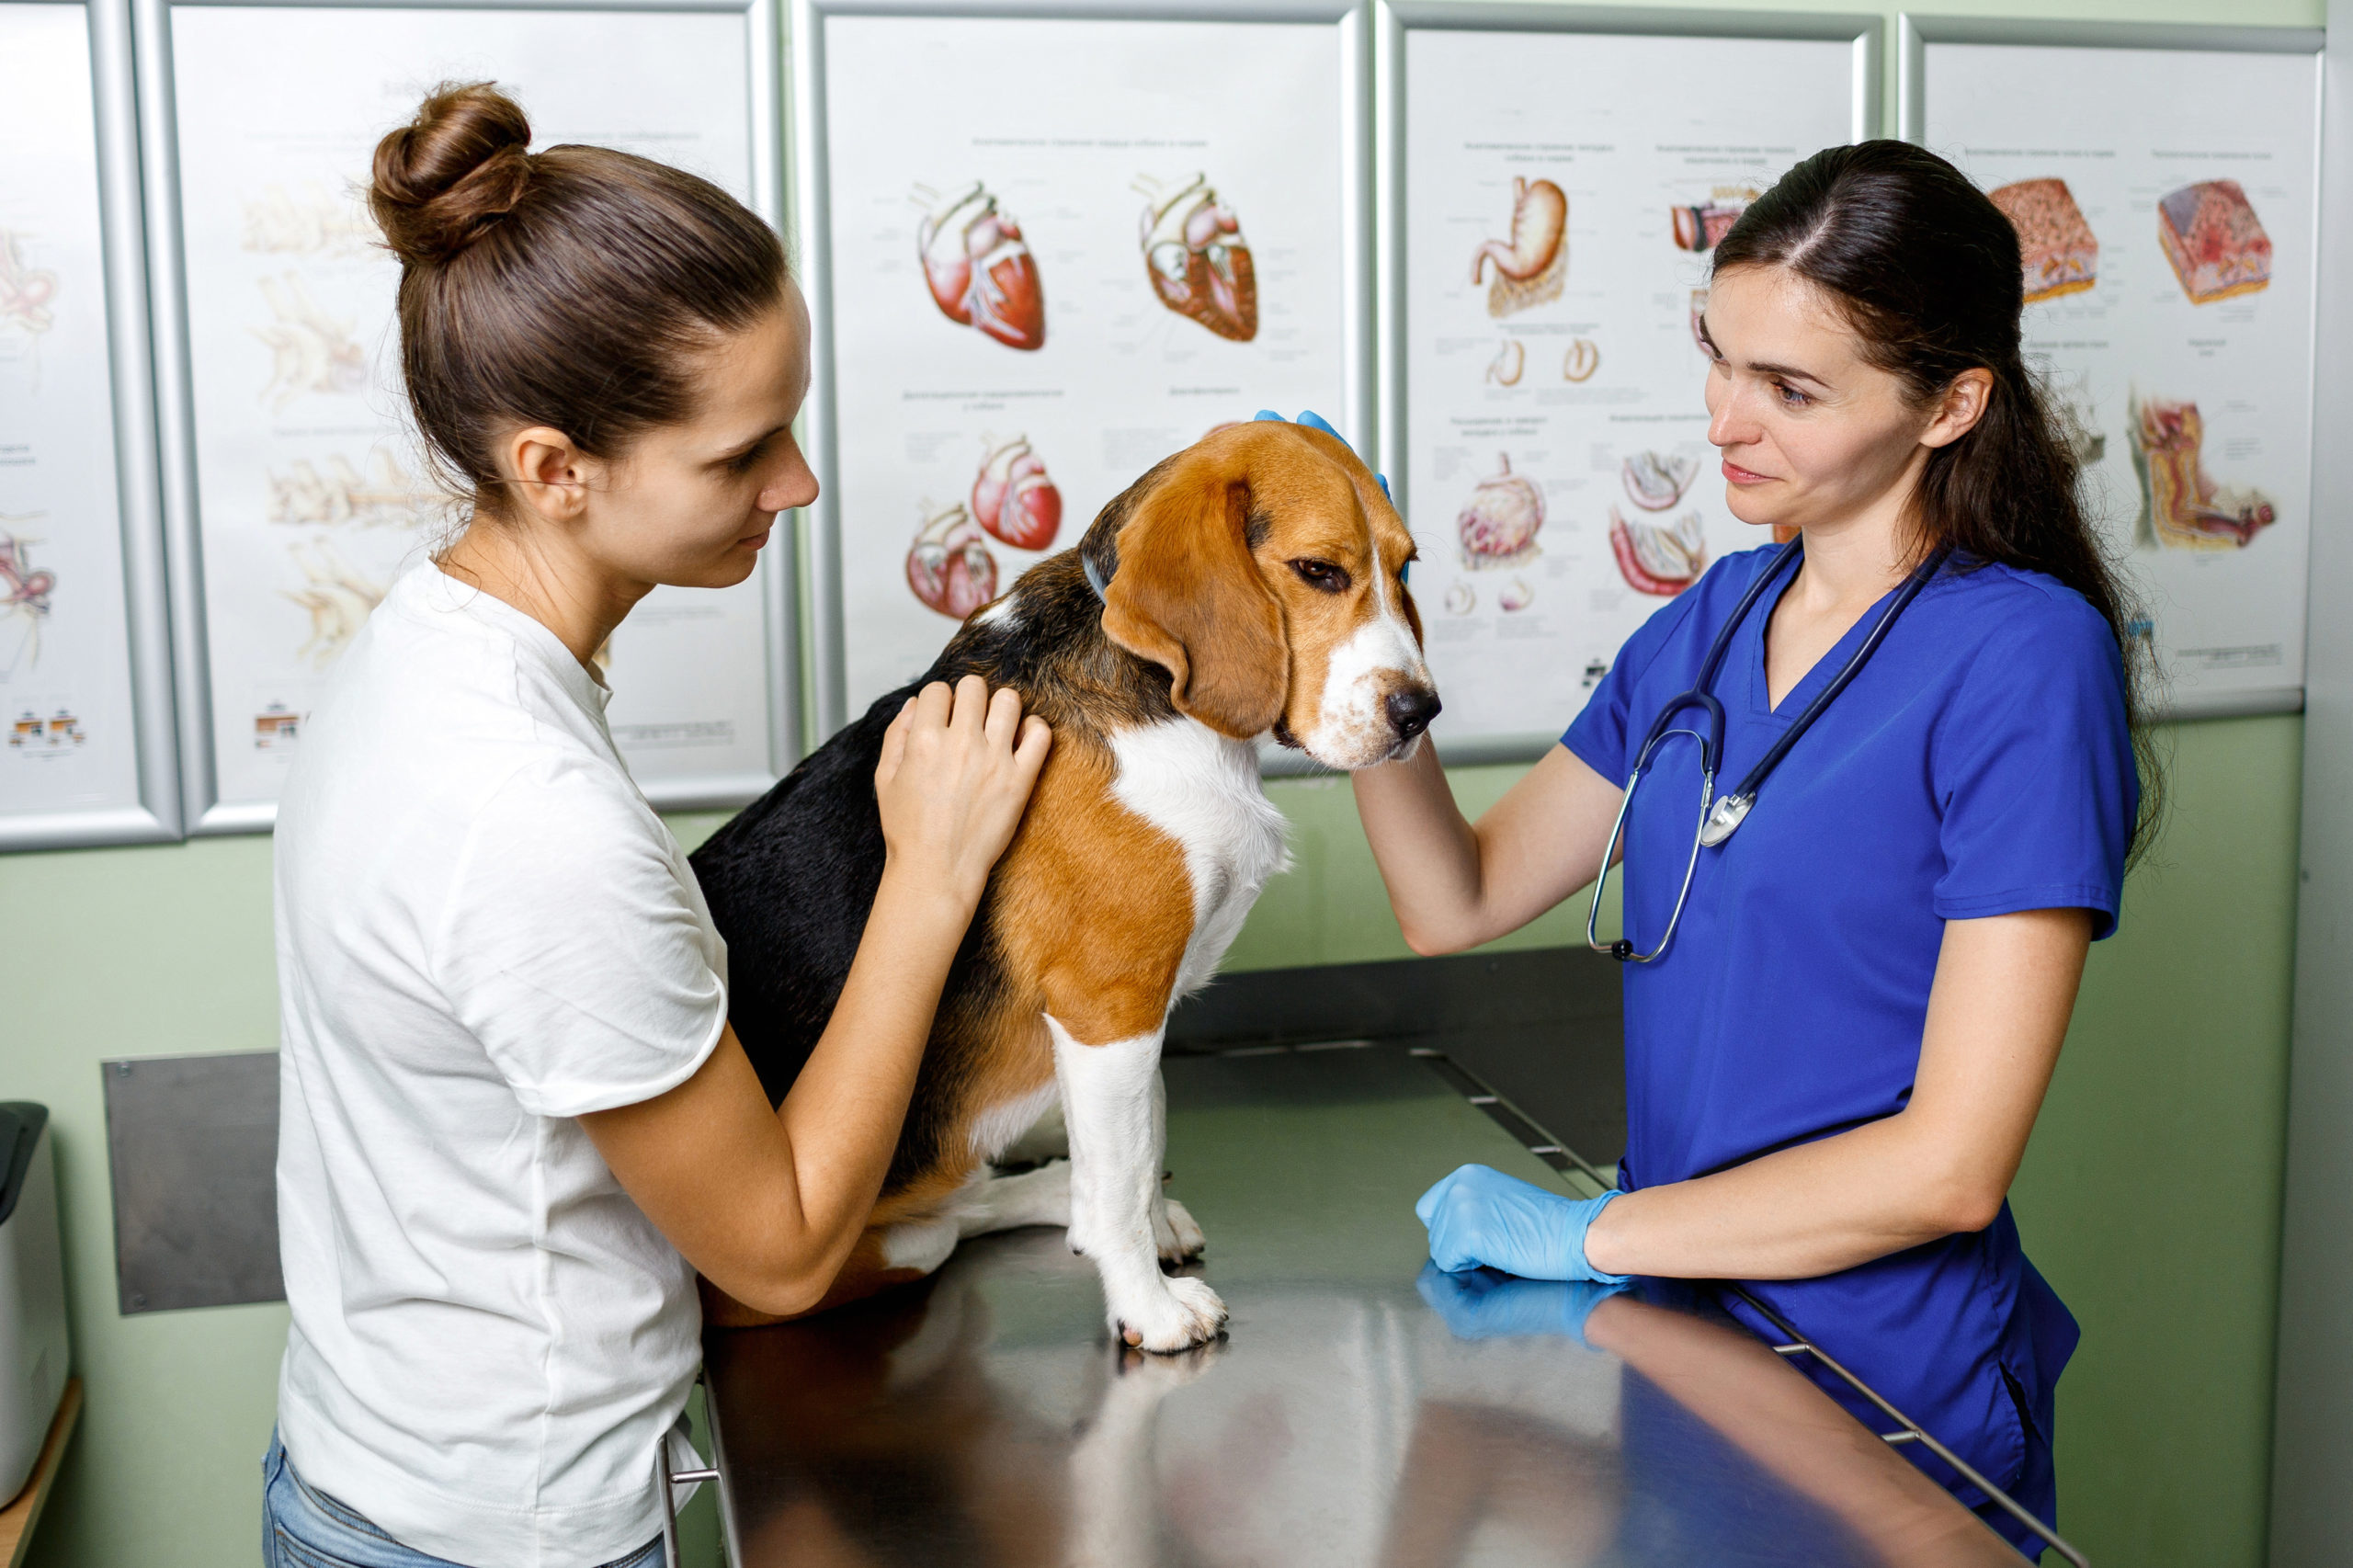 the owner brought his beagle dog to the veterinary clinic for inspection. The dog was consulted and examined. Customer satisfied